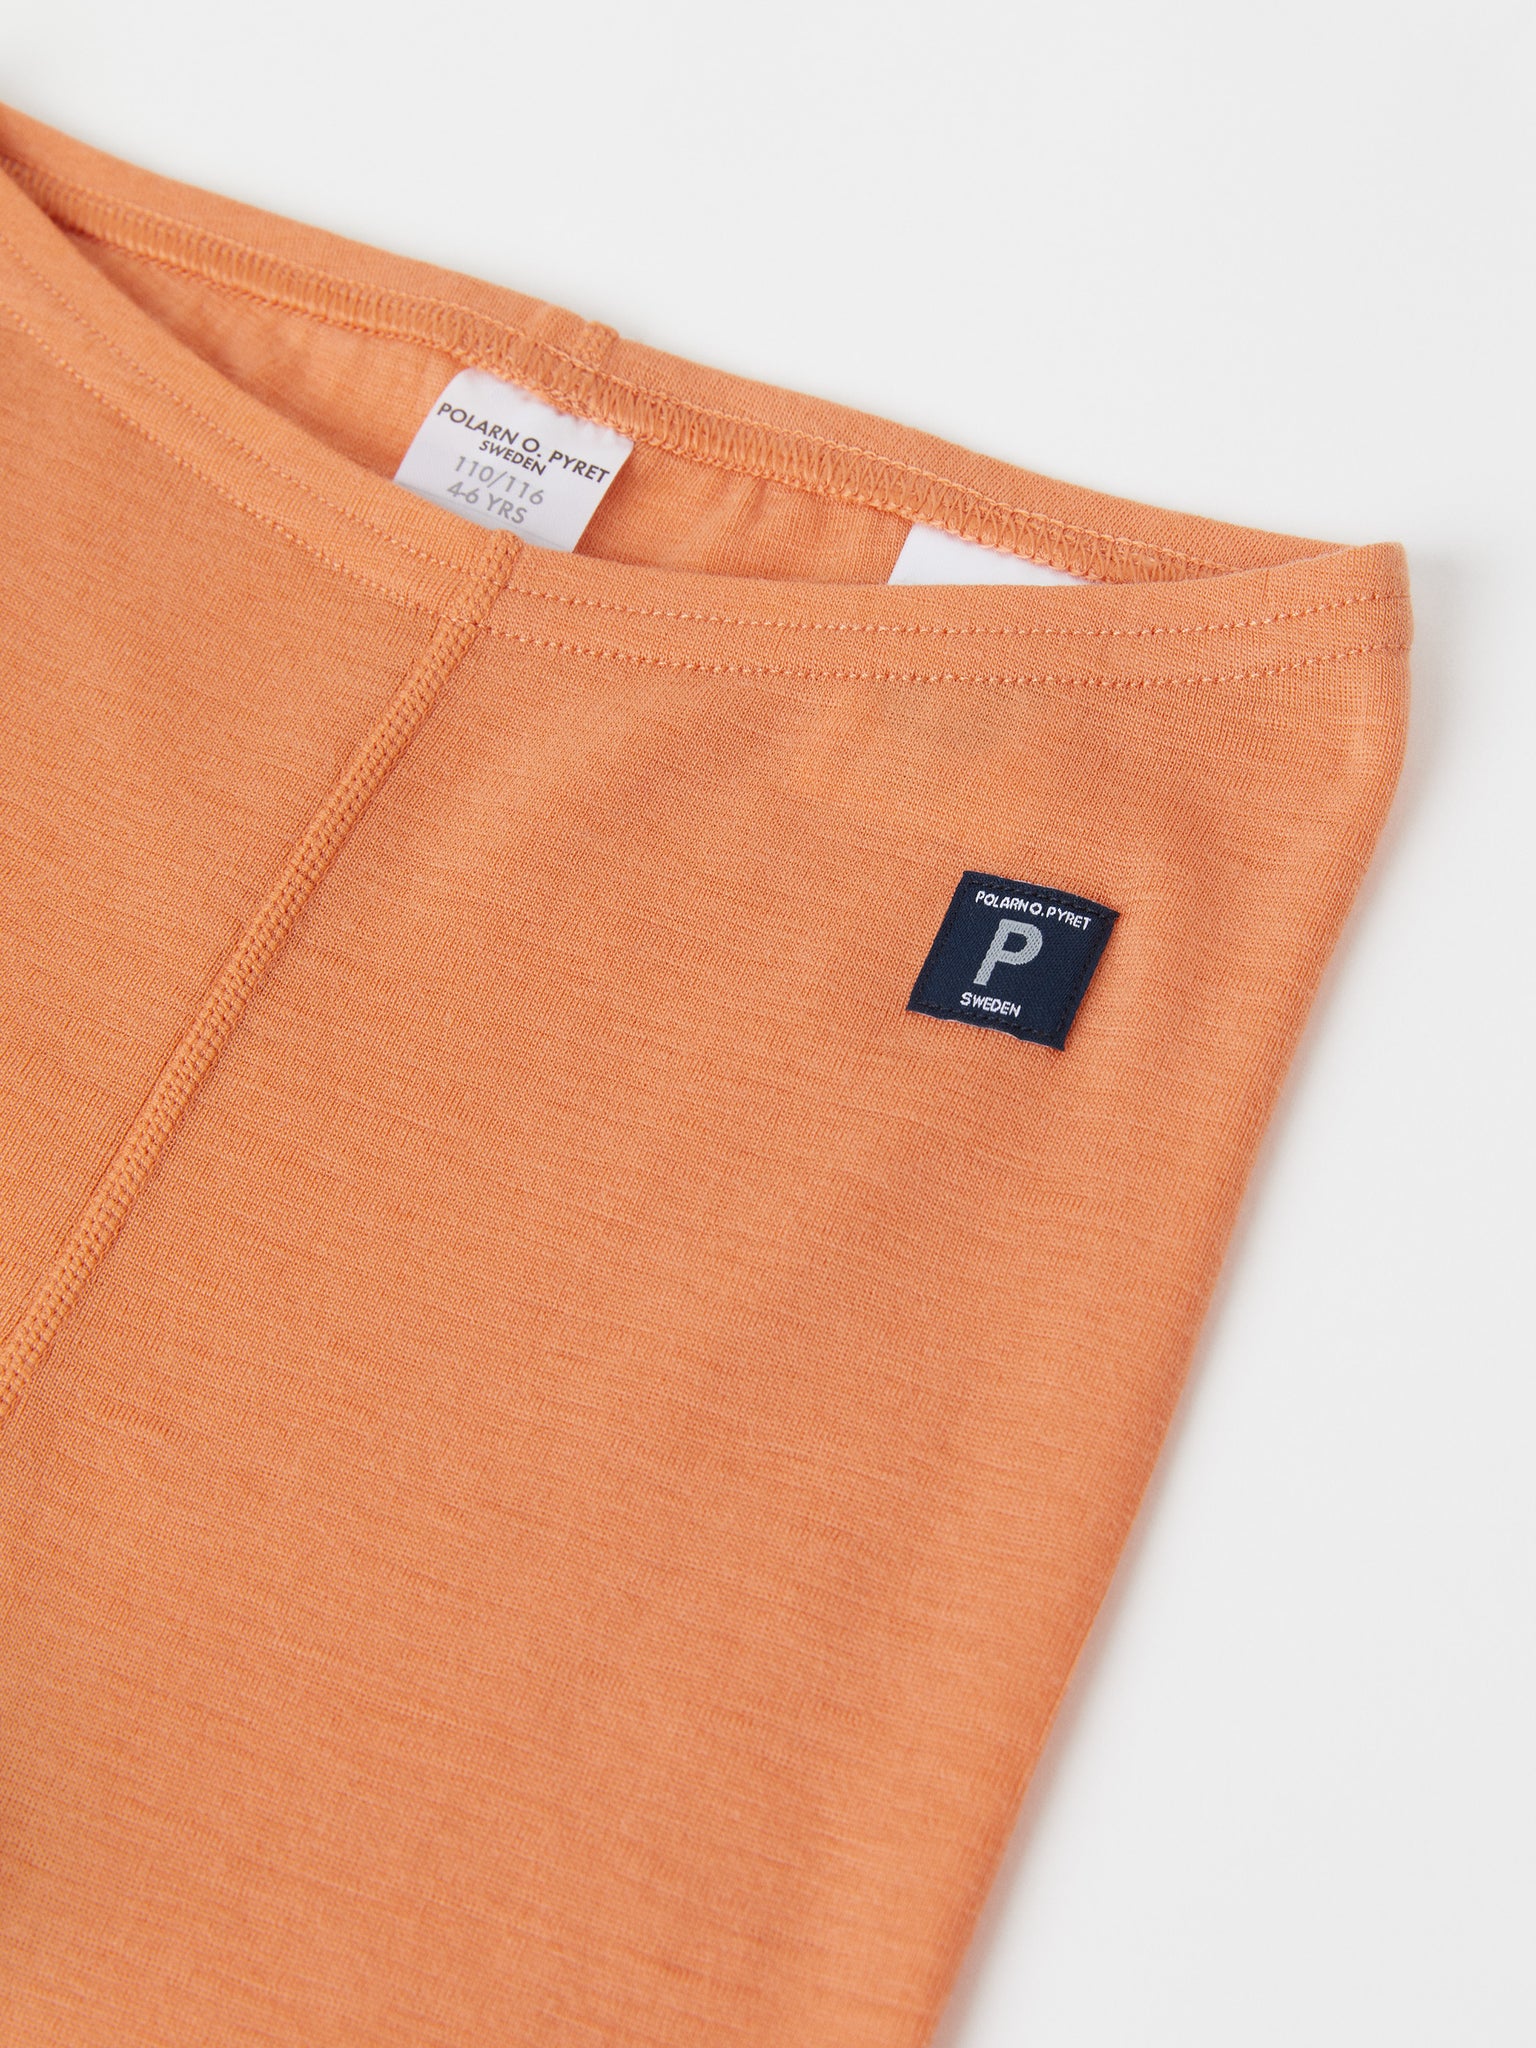 Orange Merino Kids Thermal Leggings from the Polarn O. Pyret outerwear collection. Ethically produced kids outerwear.